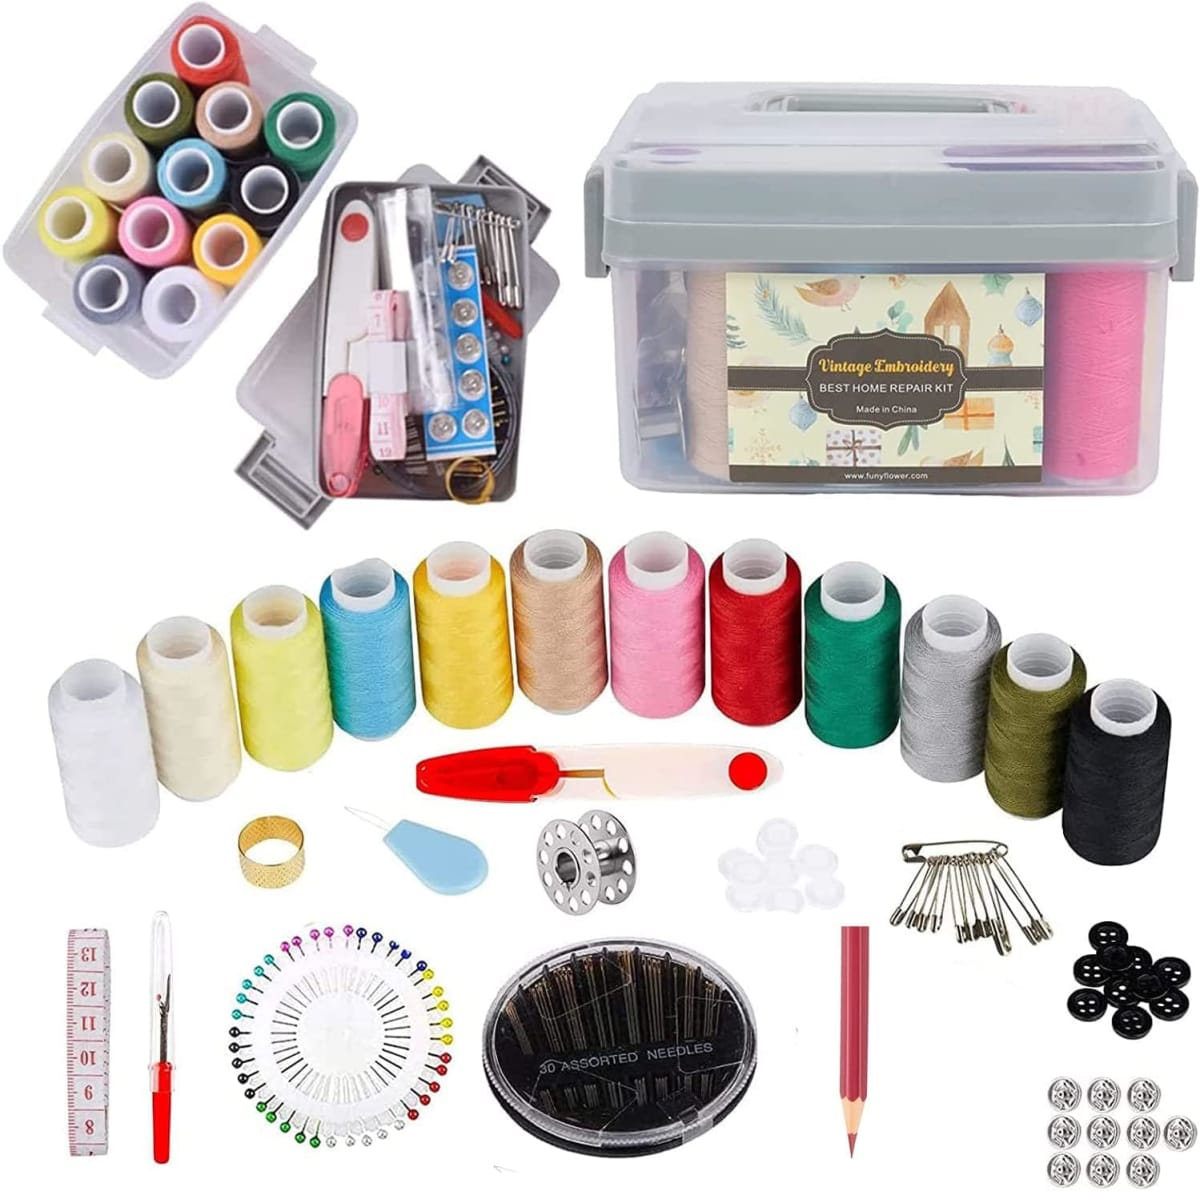 Premium Sewing Kit Set - Best sewing kits for beginners by ...